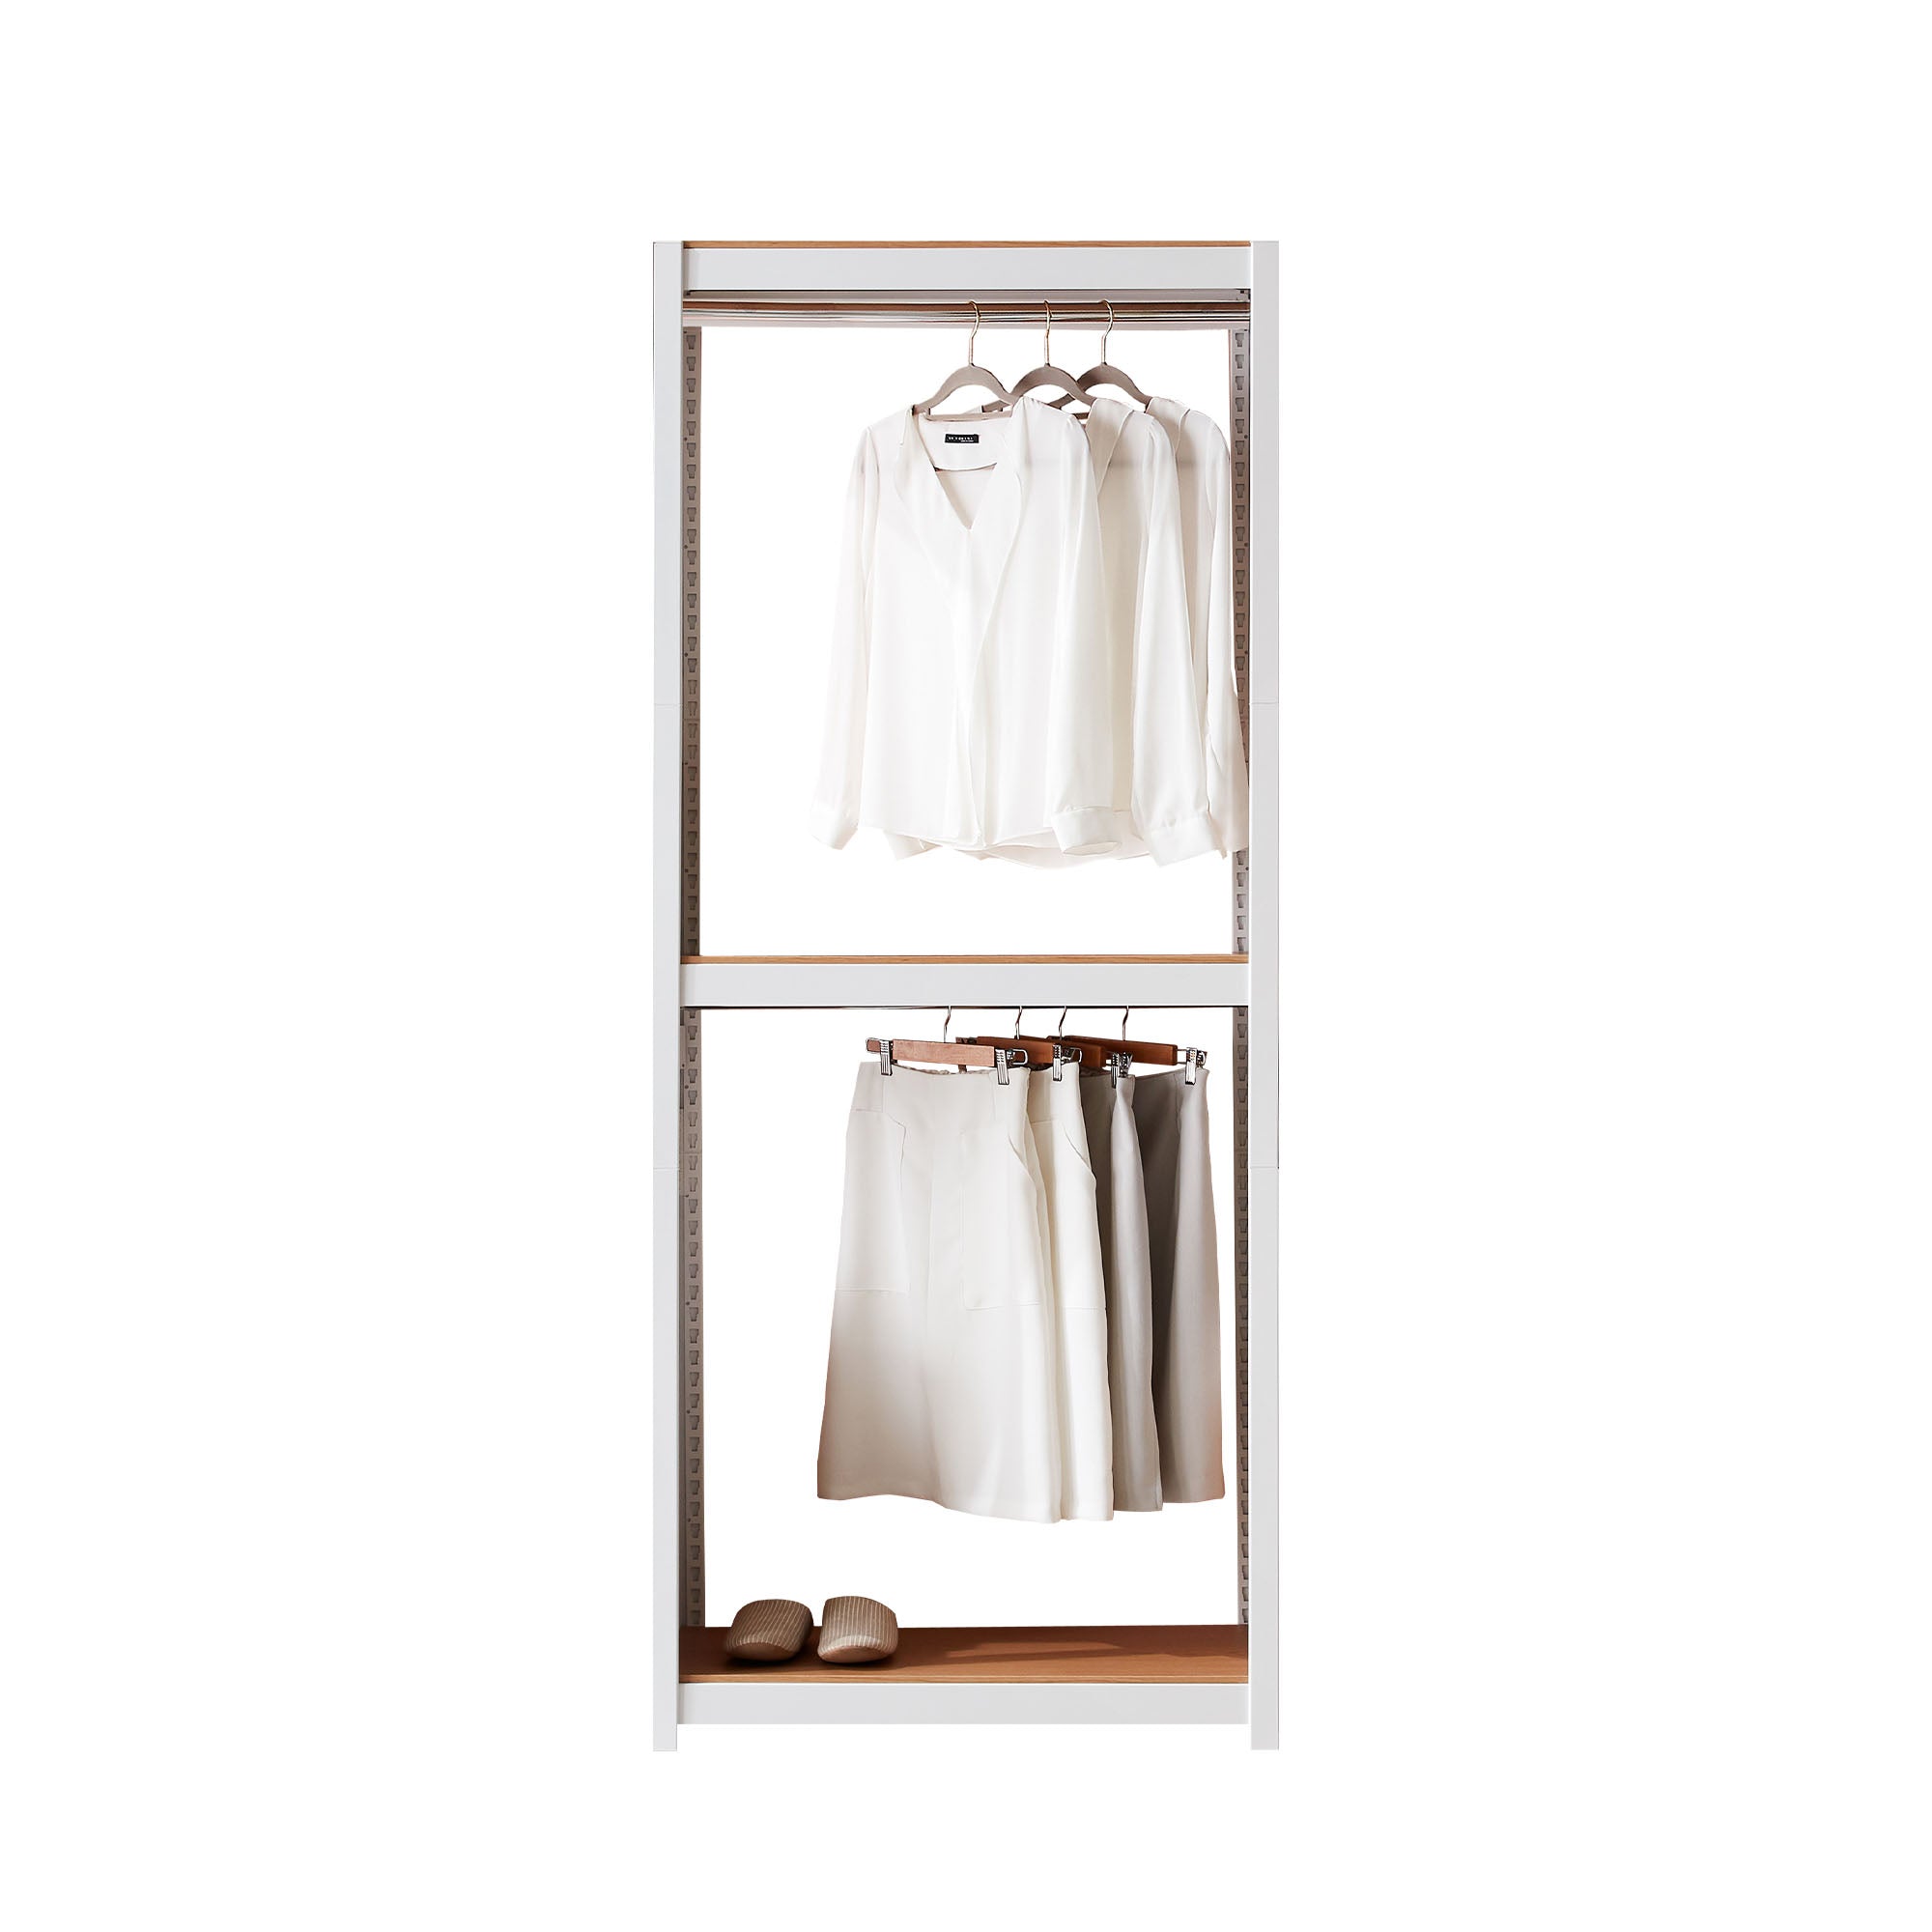 The Classic Two Tier Clothing Rack in White